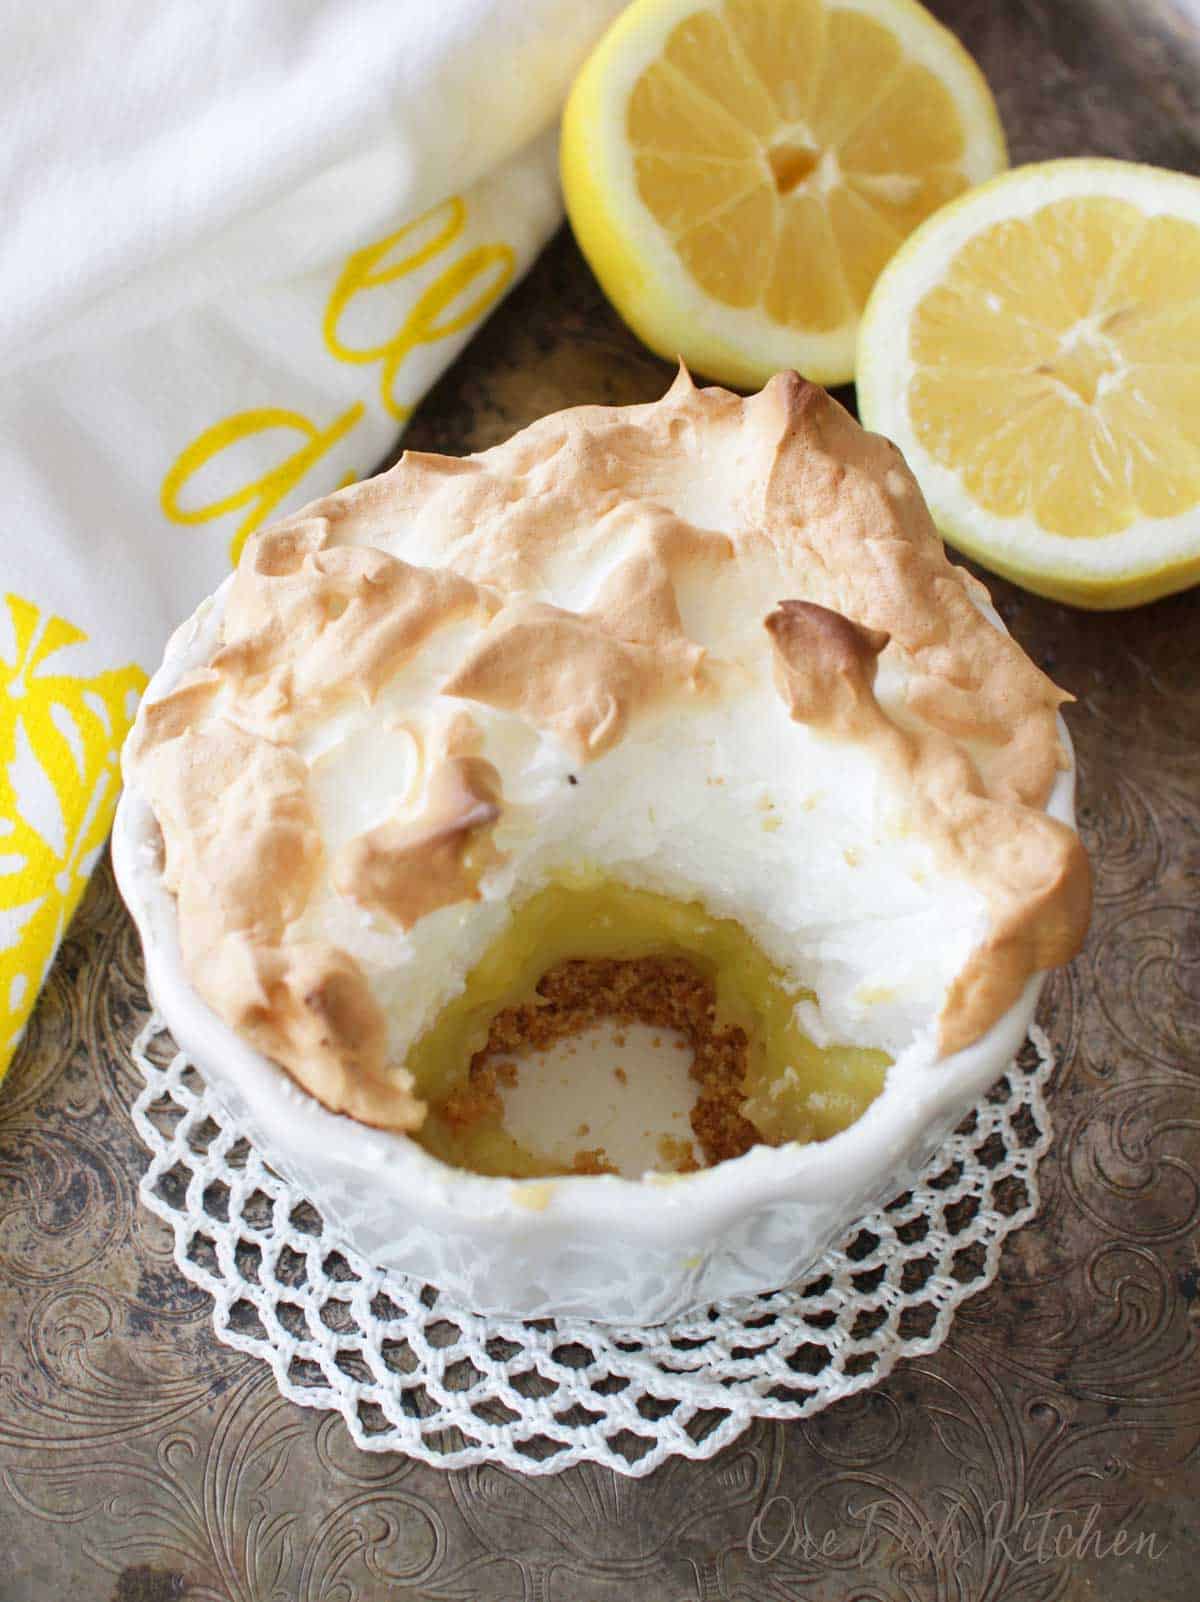 A small round lemon meringue pie with a round section removed next to sliced lemons on a silver tray.